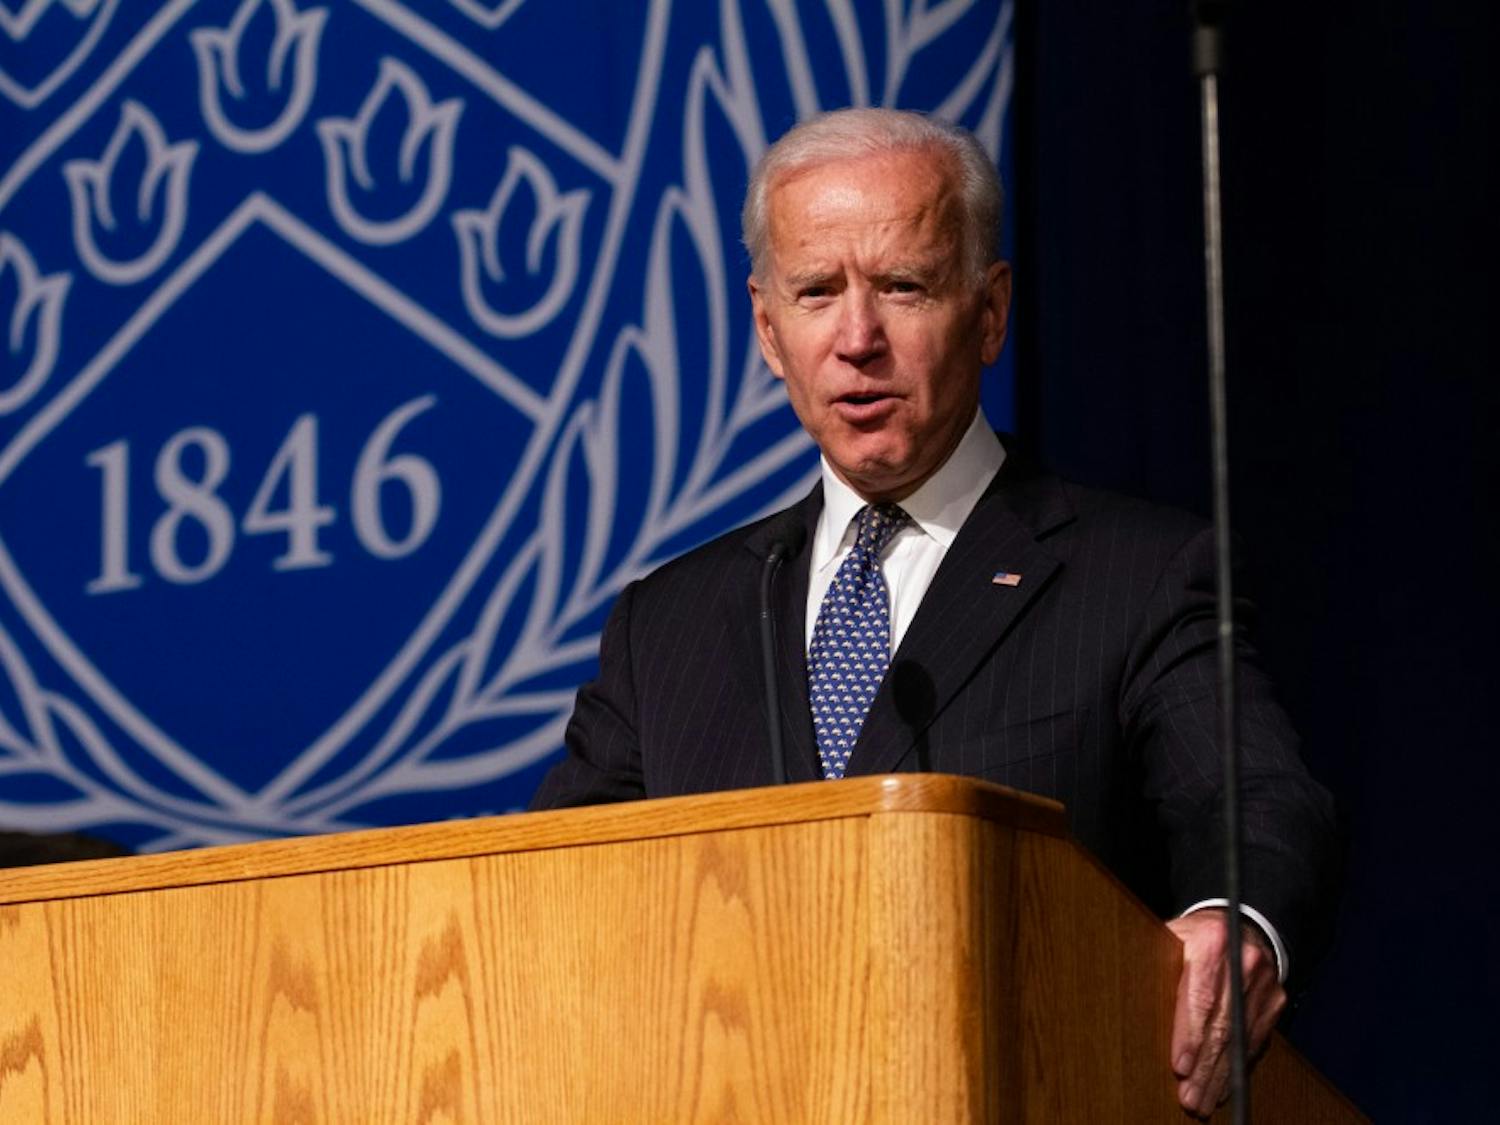 Former U.S. Vice President Joe Biden speaks at Thursday's Distinguished Speaker Series. Biden spoke about the current political climate, the recent targeted attack and his hopes in creating a tamer political environment.&nbsp;